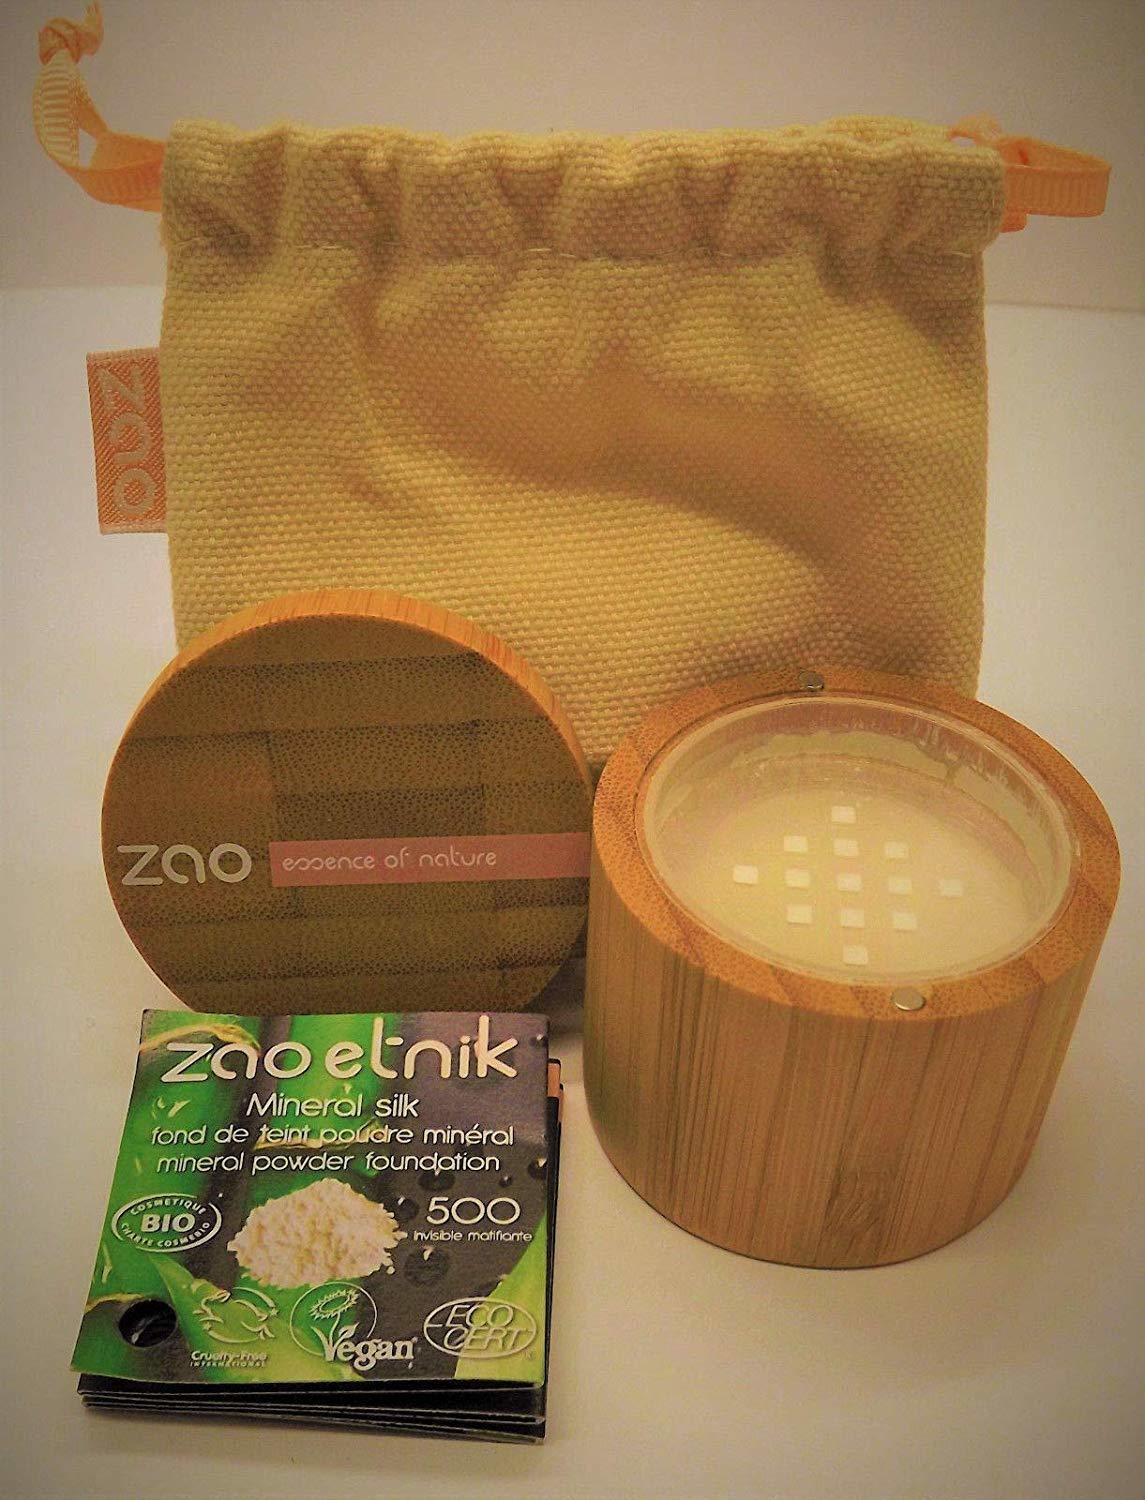 ZAO essence of nature ZAO 500 - Mattidying invisible Bamboo Mineral Silk  Puder 15 g Test TOP Angebote ab 25,31 € (Januar 2023)